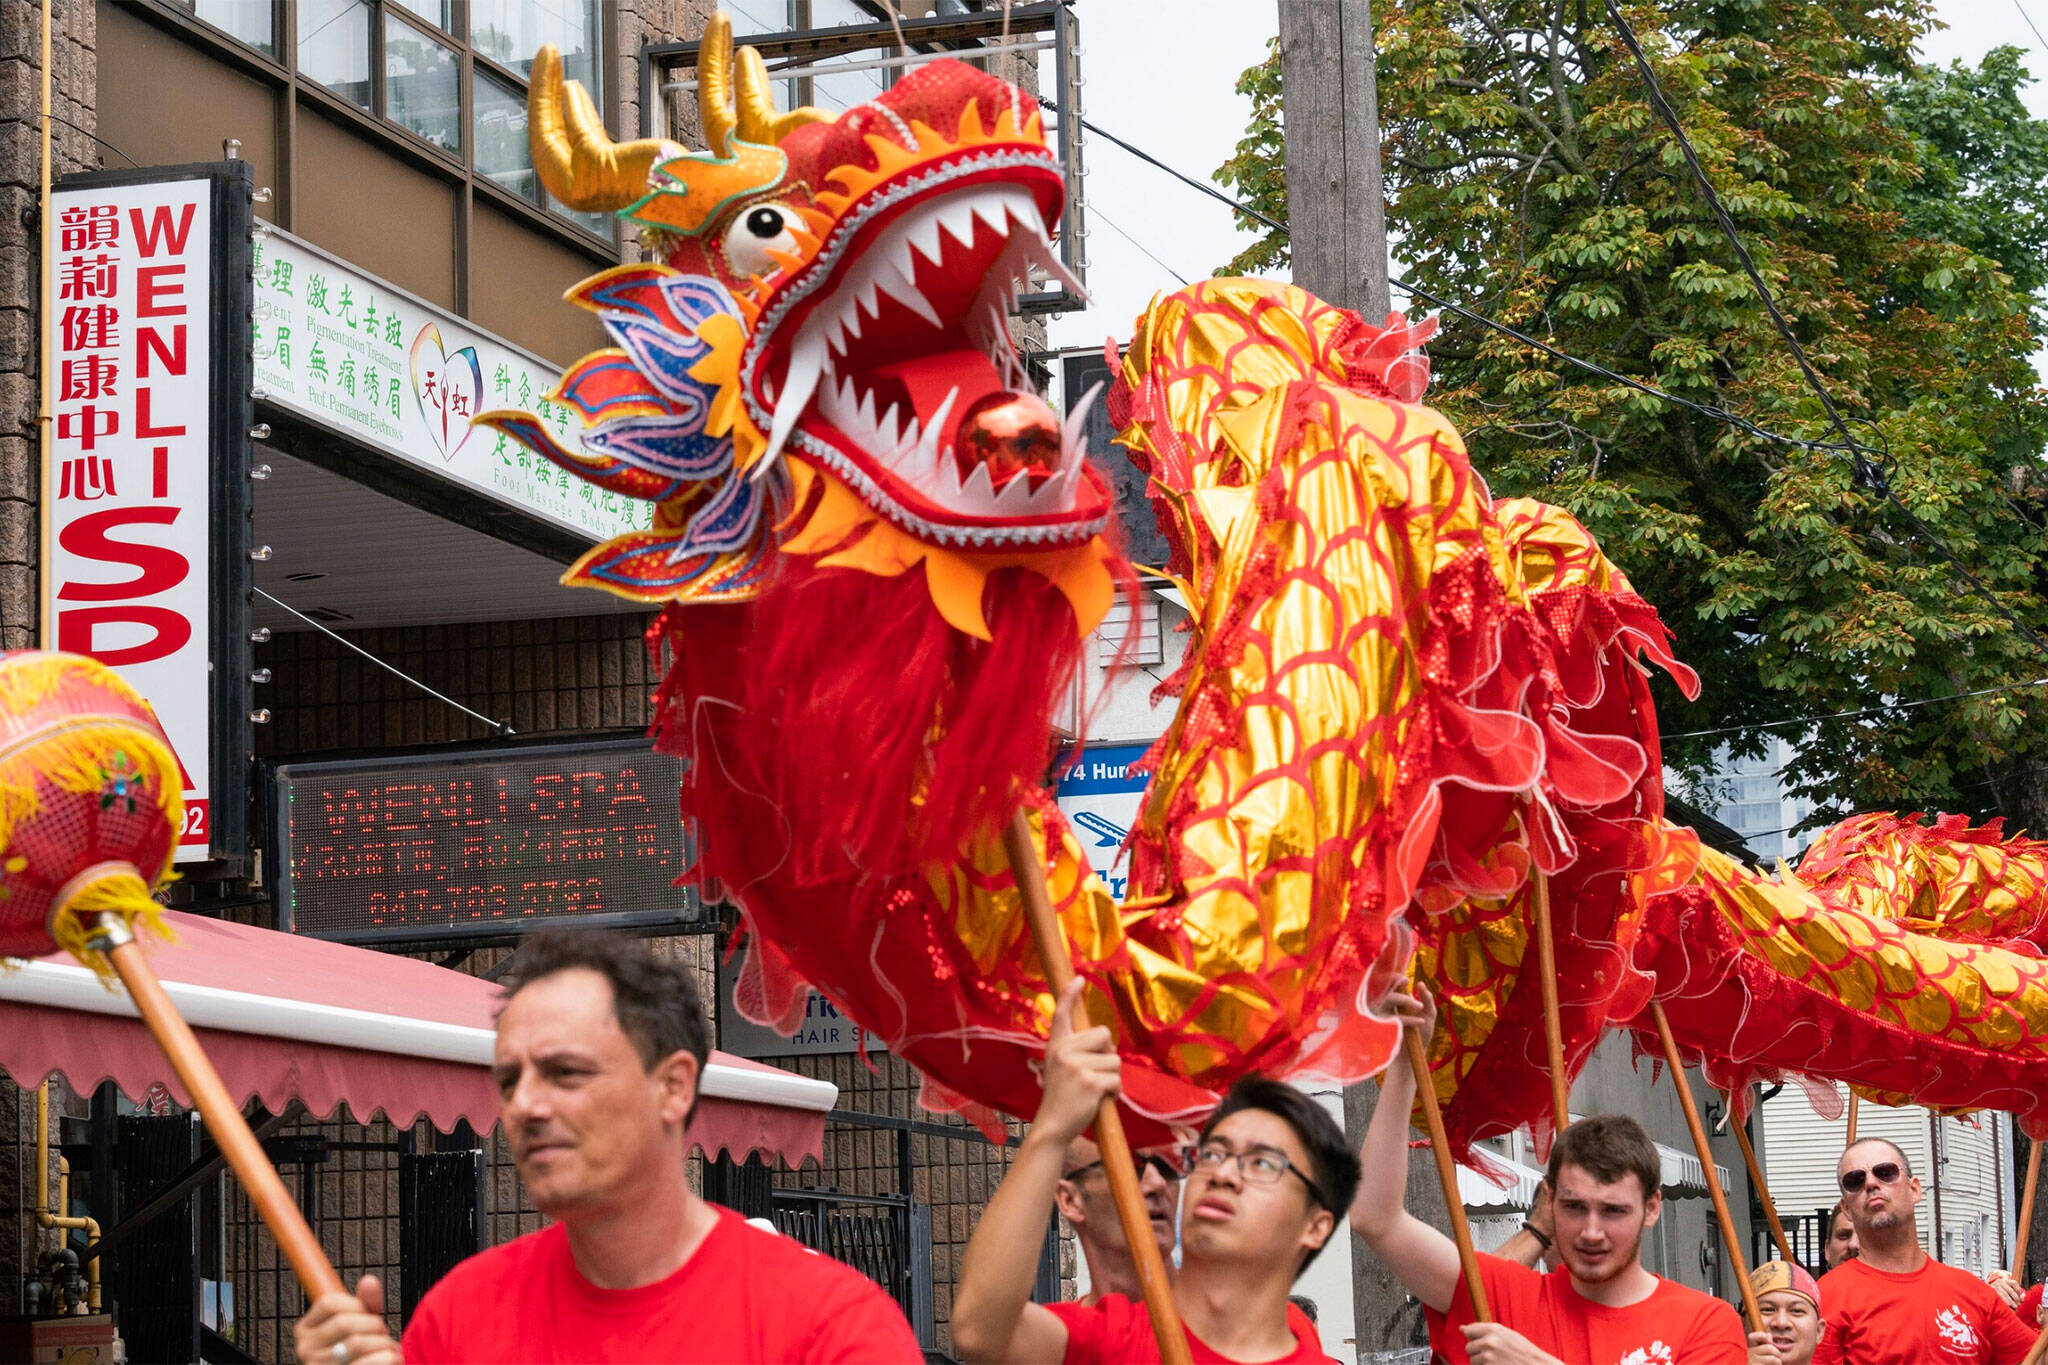 Chinatown in Toronto is transforming into a huge street festival this